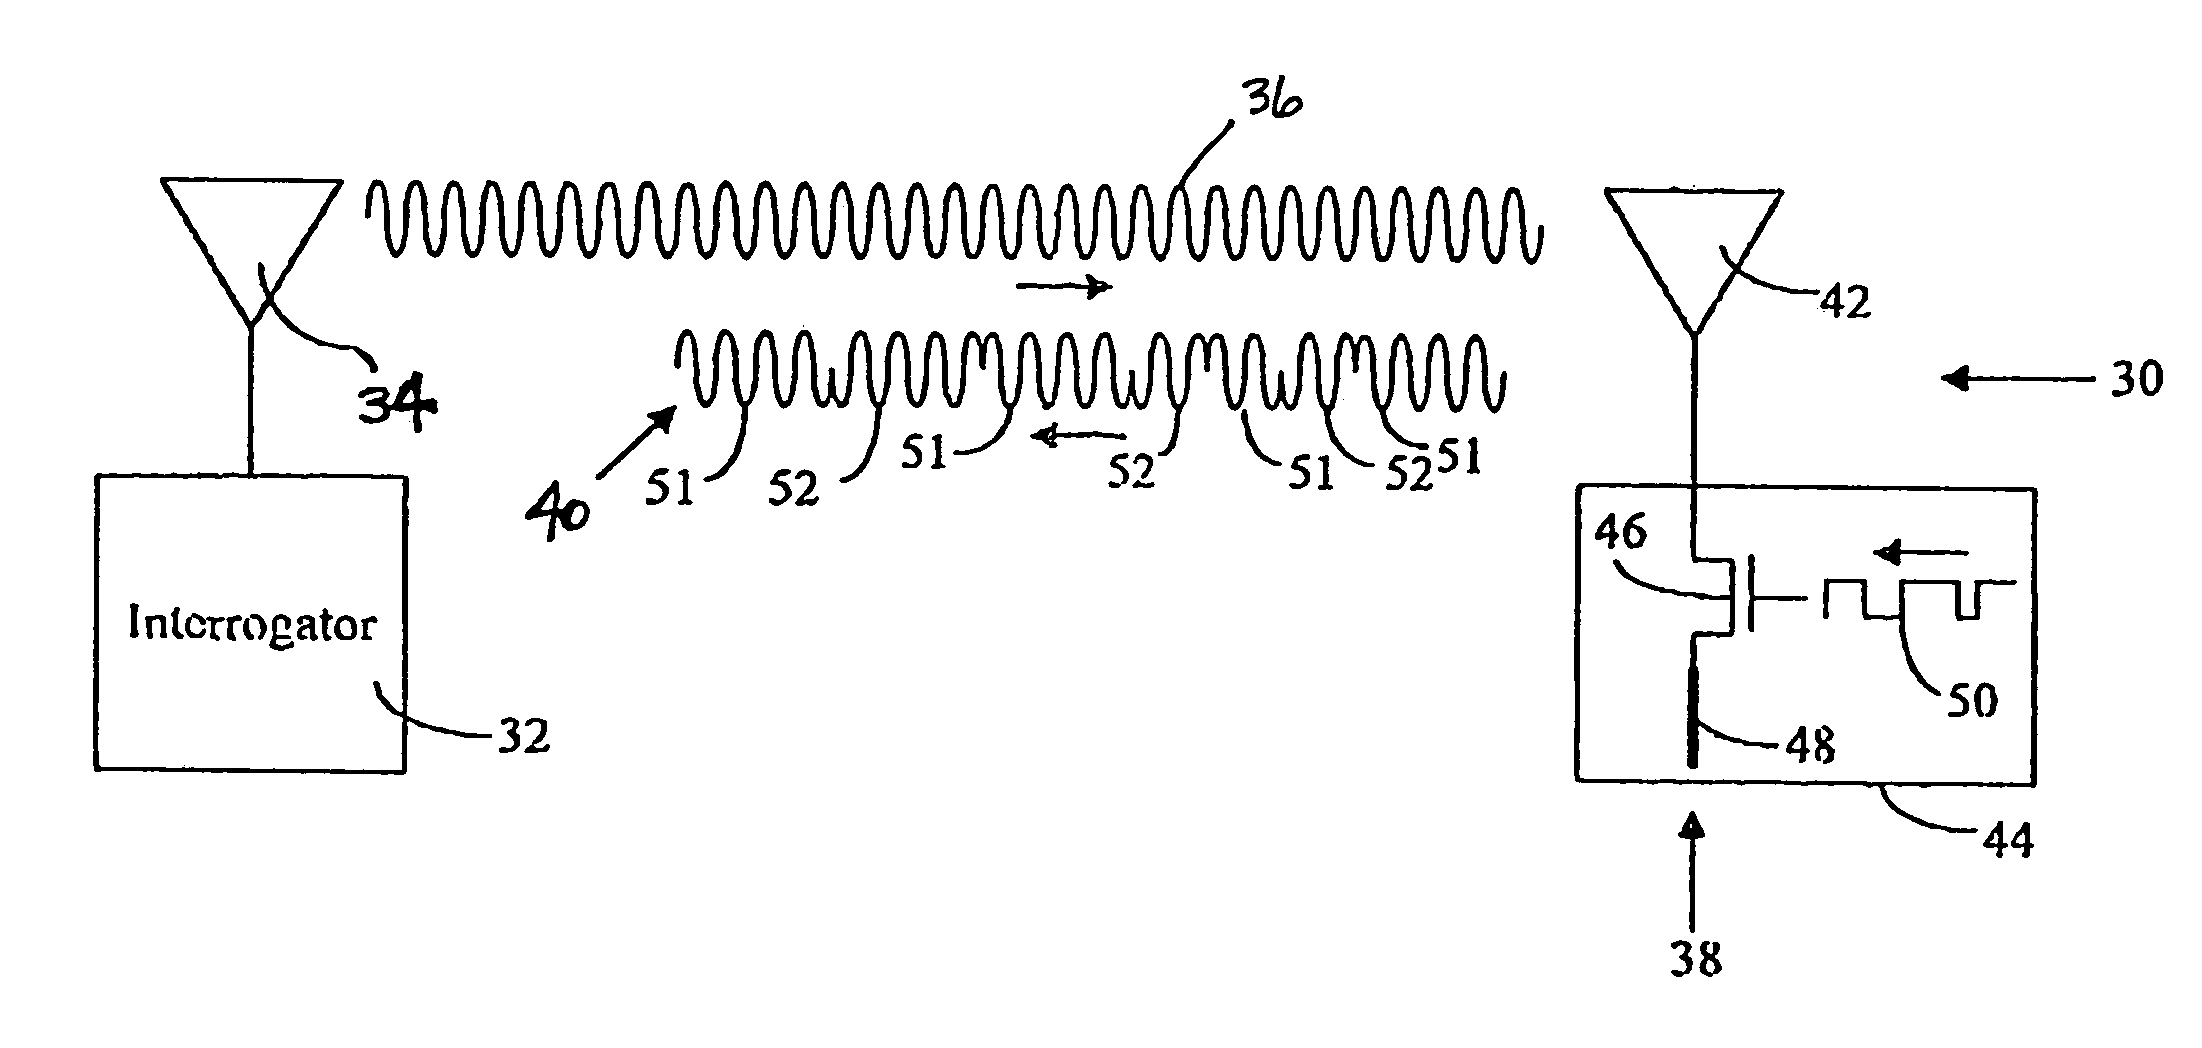 Phase modulation in RF tag